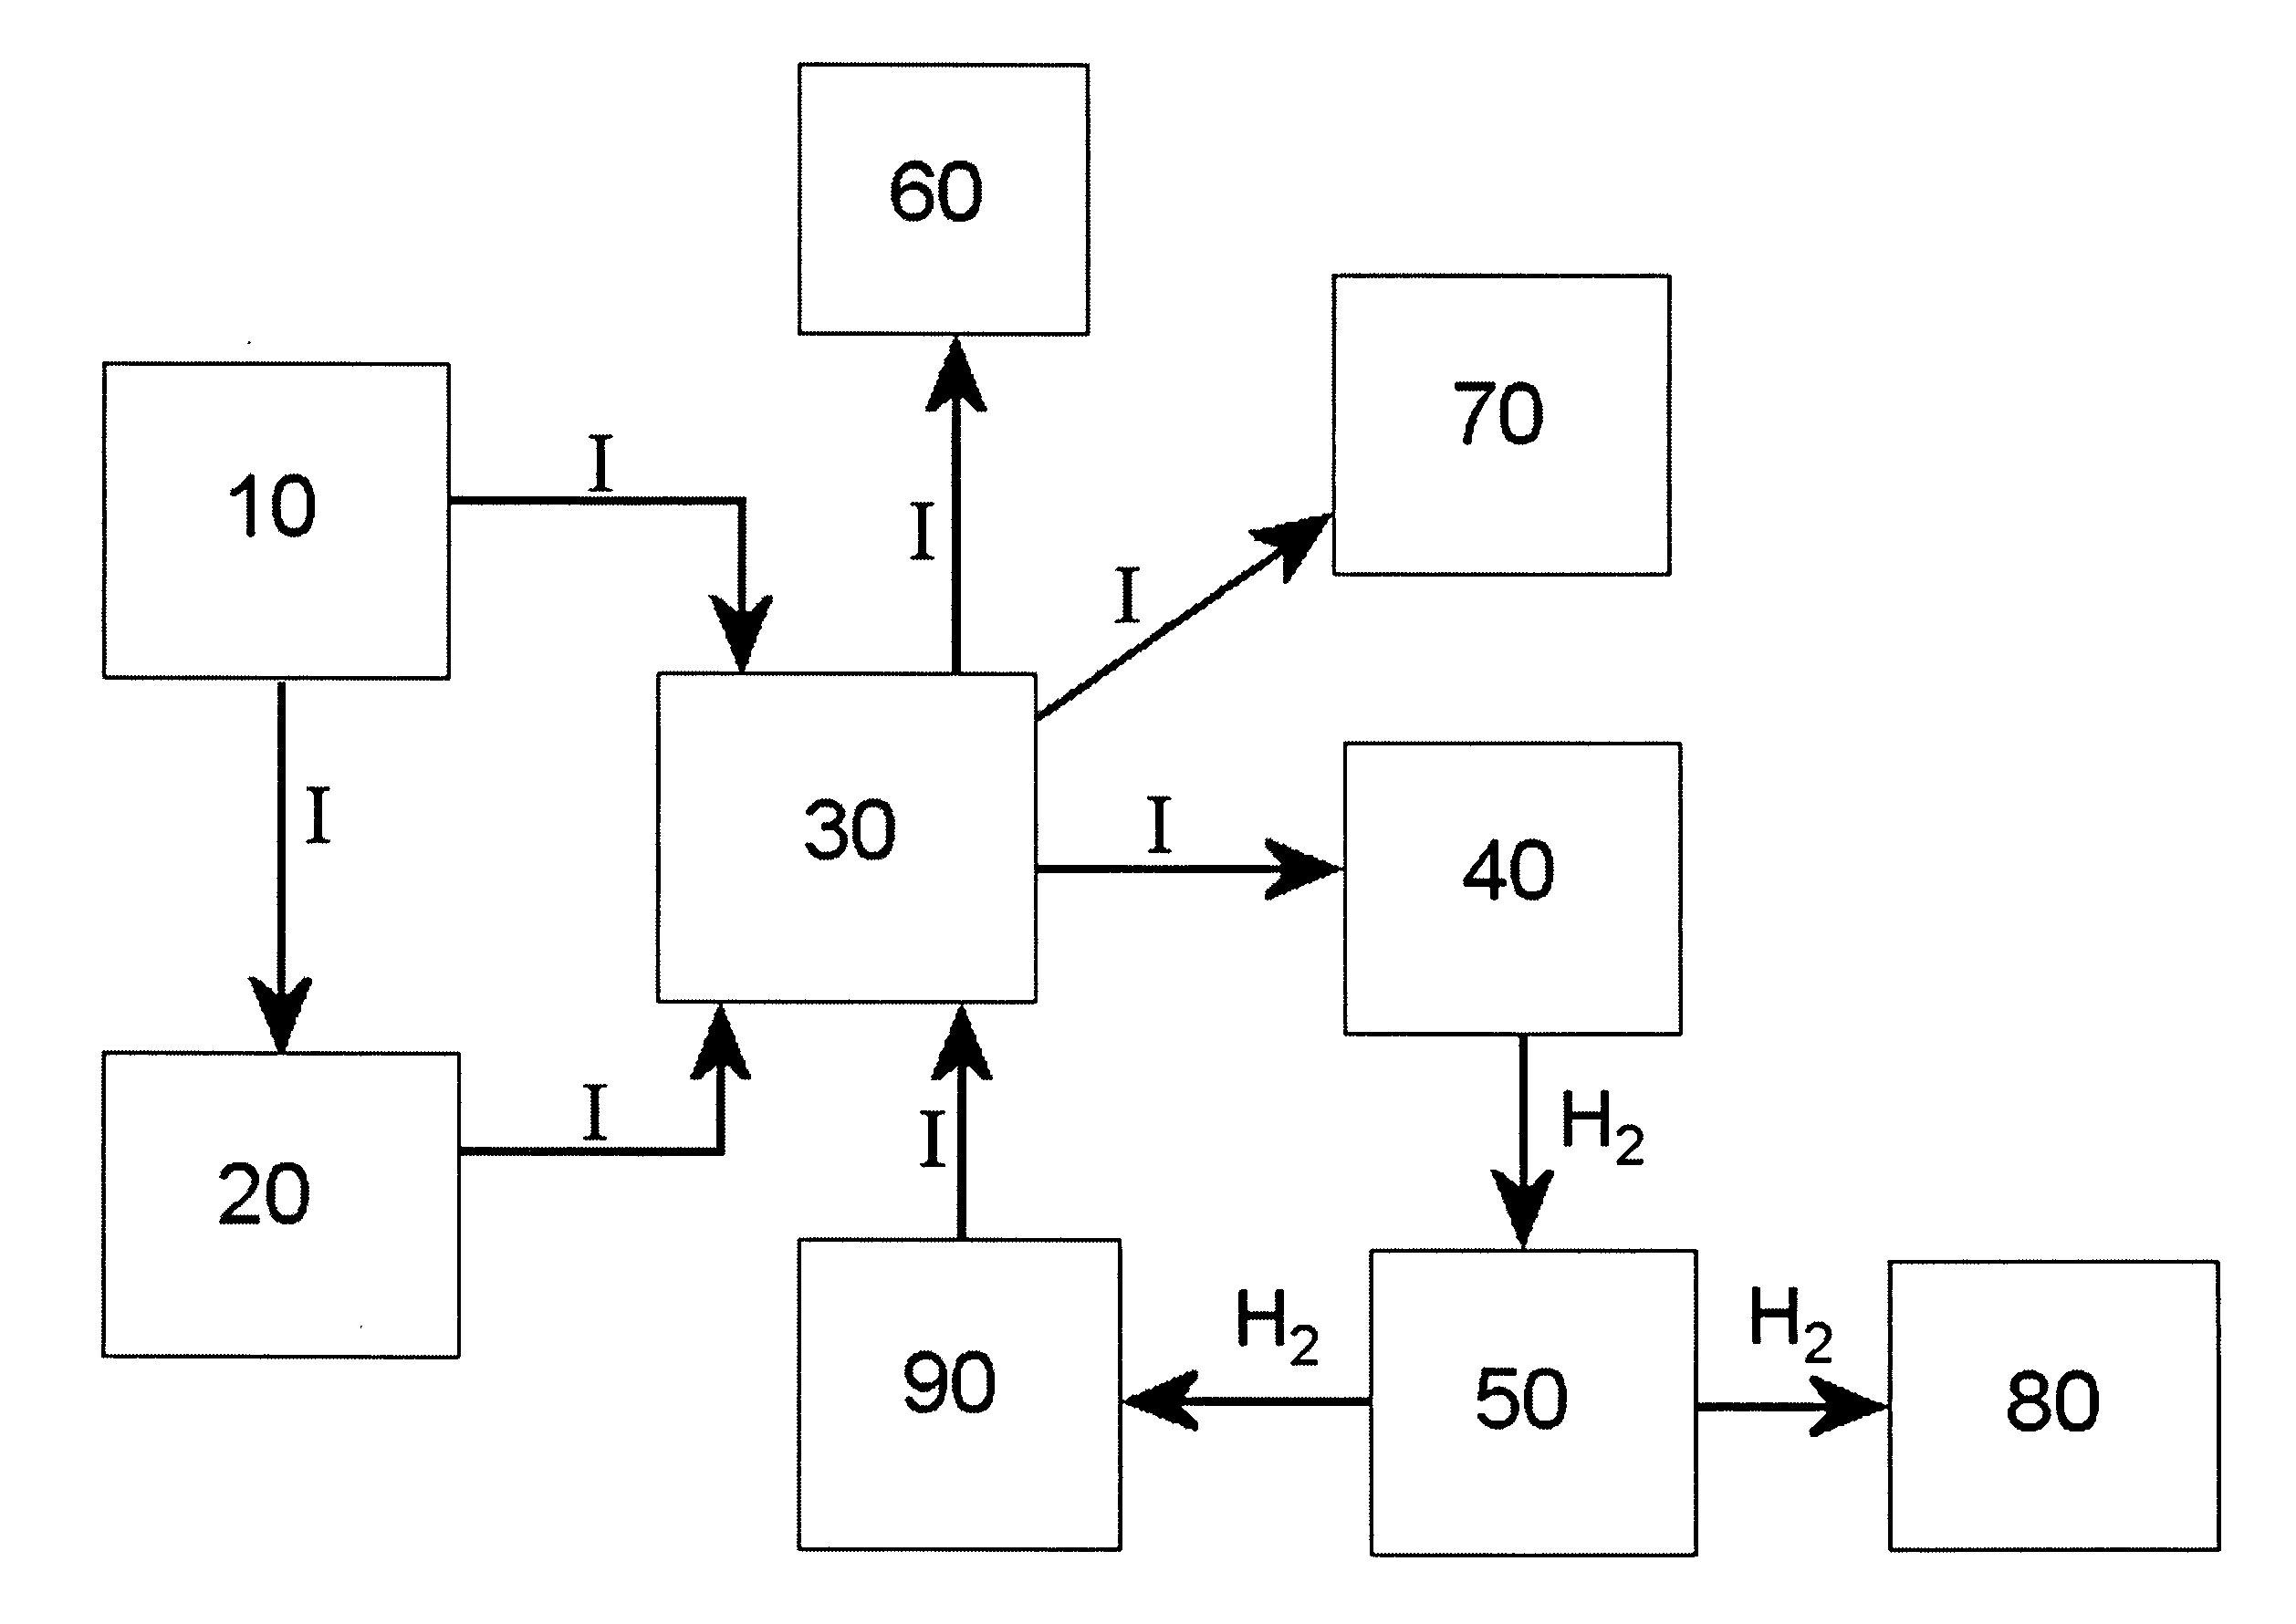 Power generation and supply system